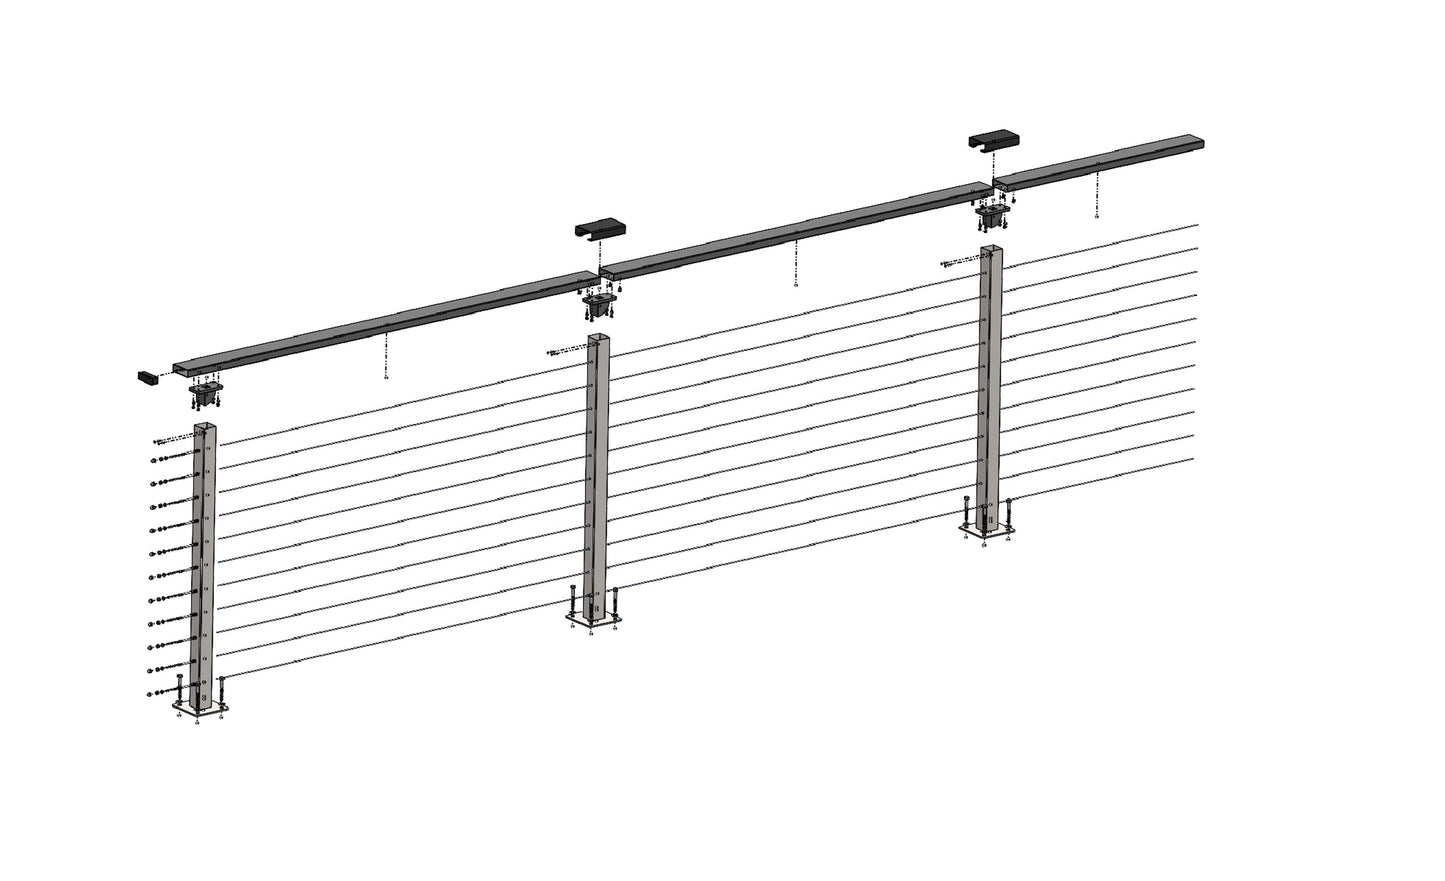 29 ft. x 42 in. Black Deck Cable Railing, Base Mount , Stainless